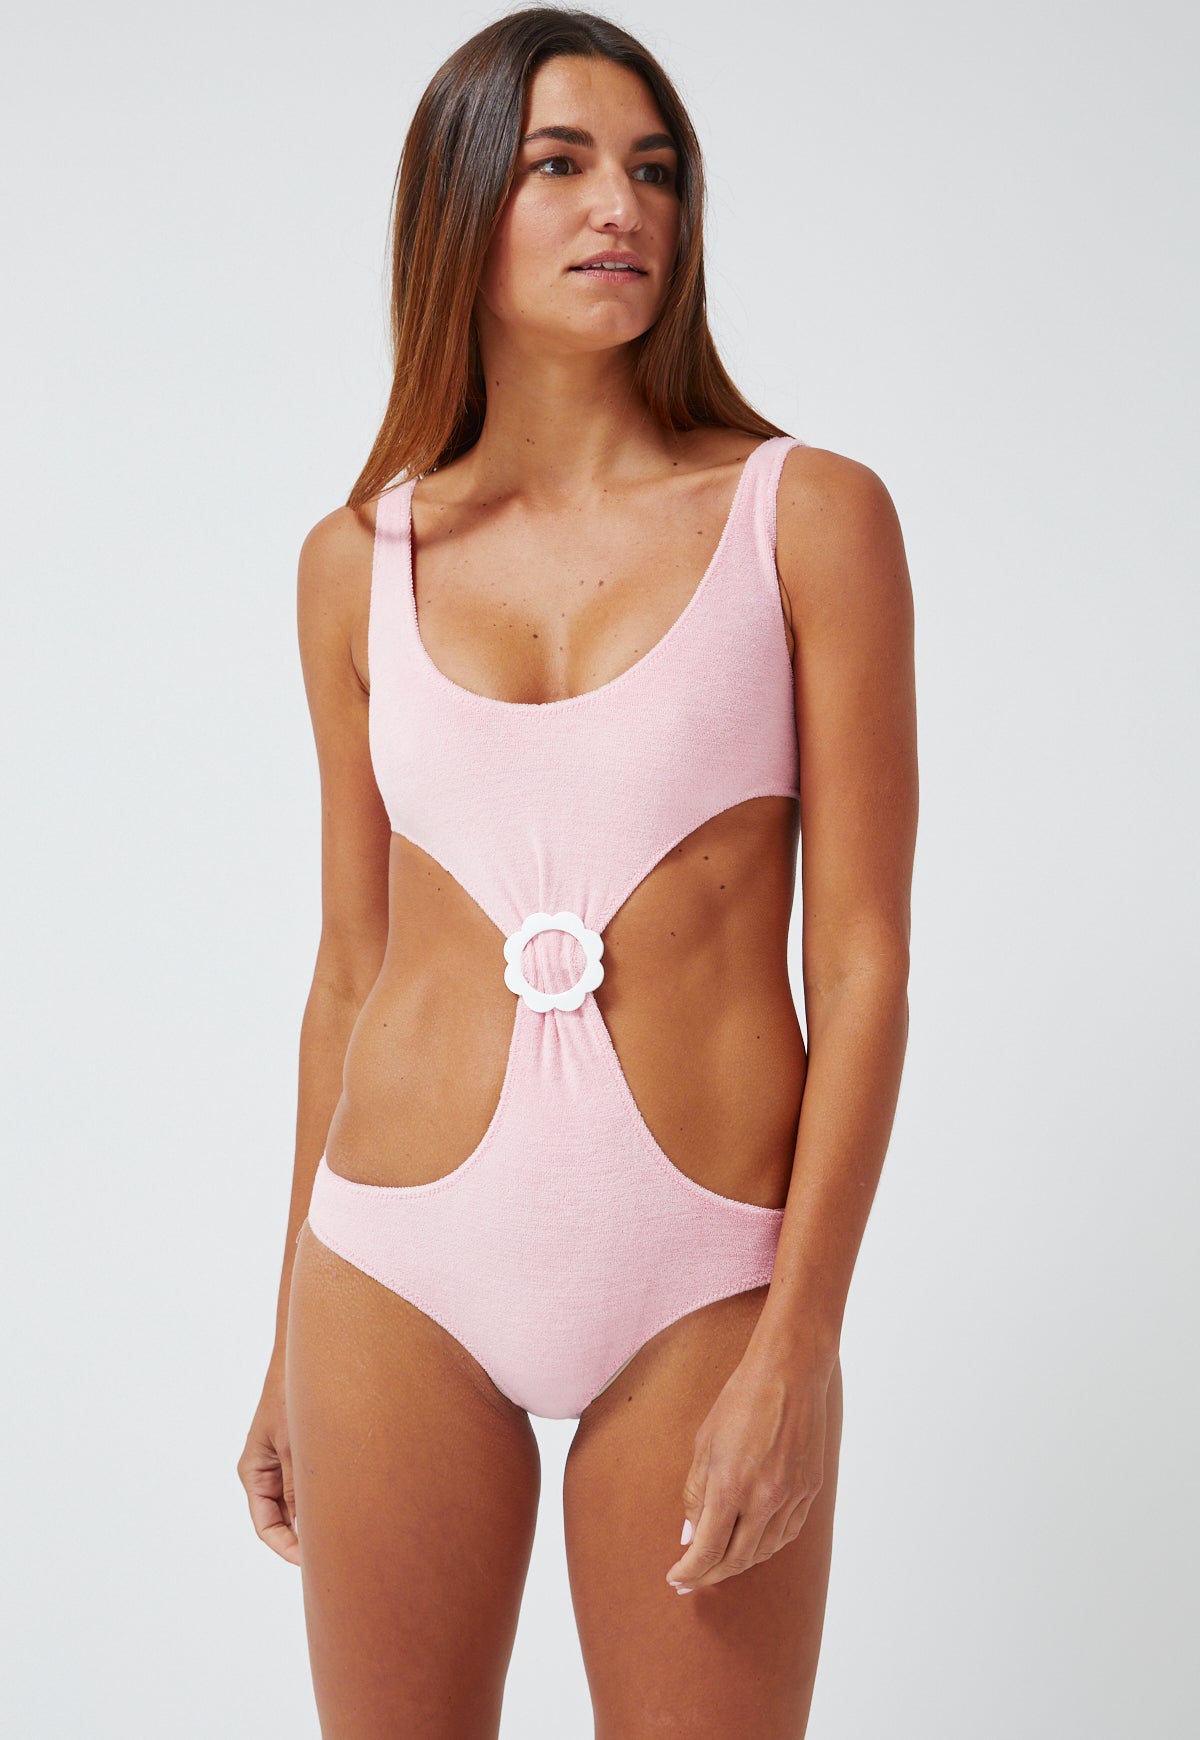 THE SCALLOP CUT-OUT MAILLOT in PINK TERRY CLOTH